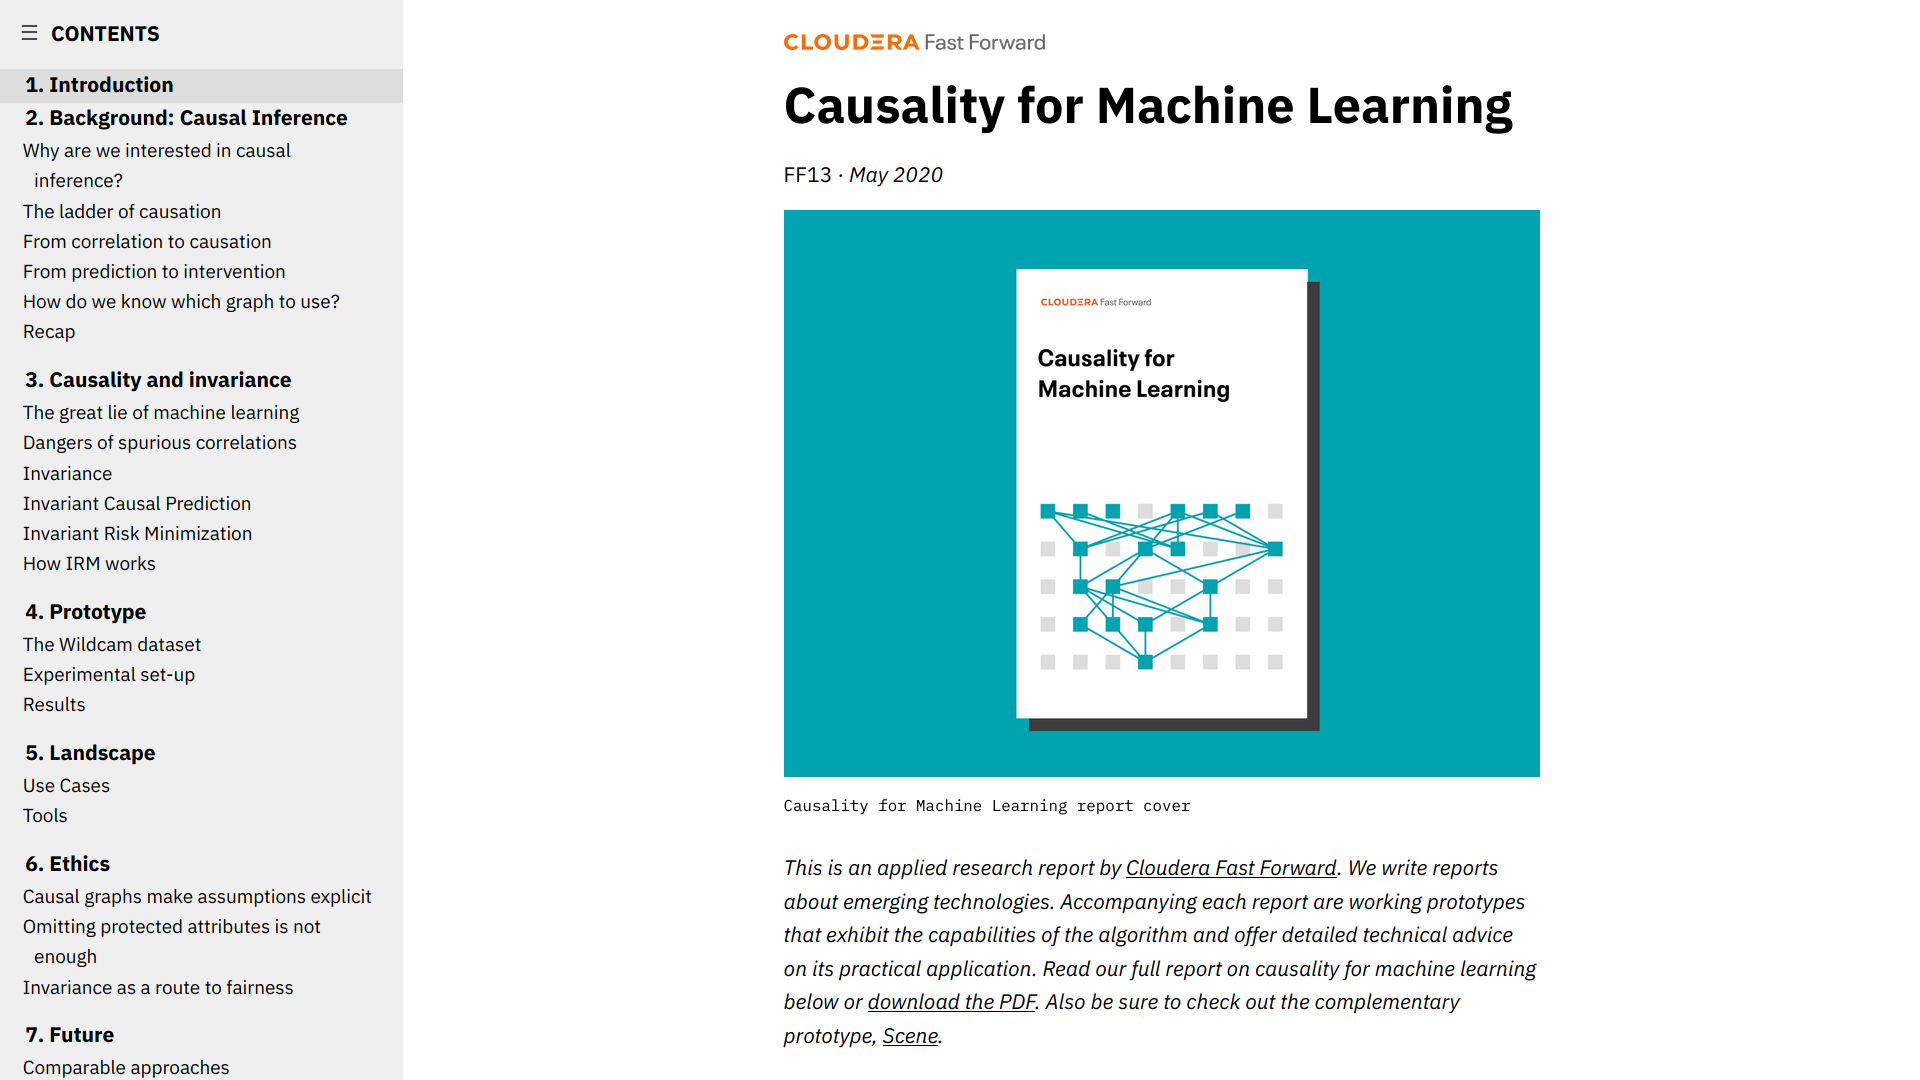 Causality for Machine Learning